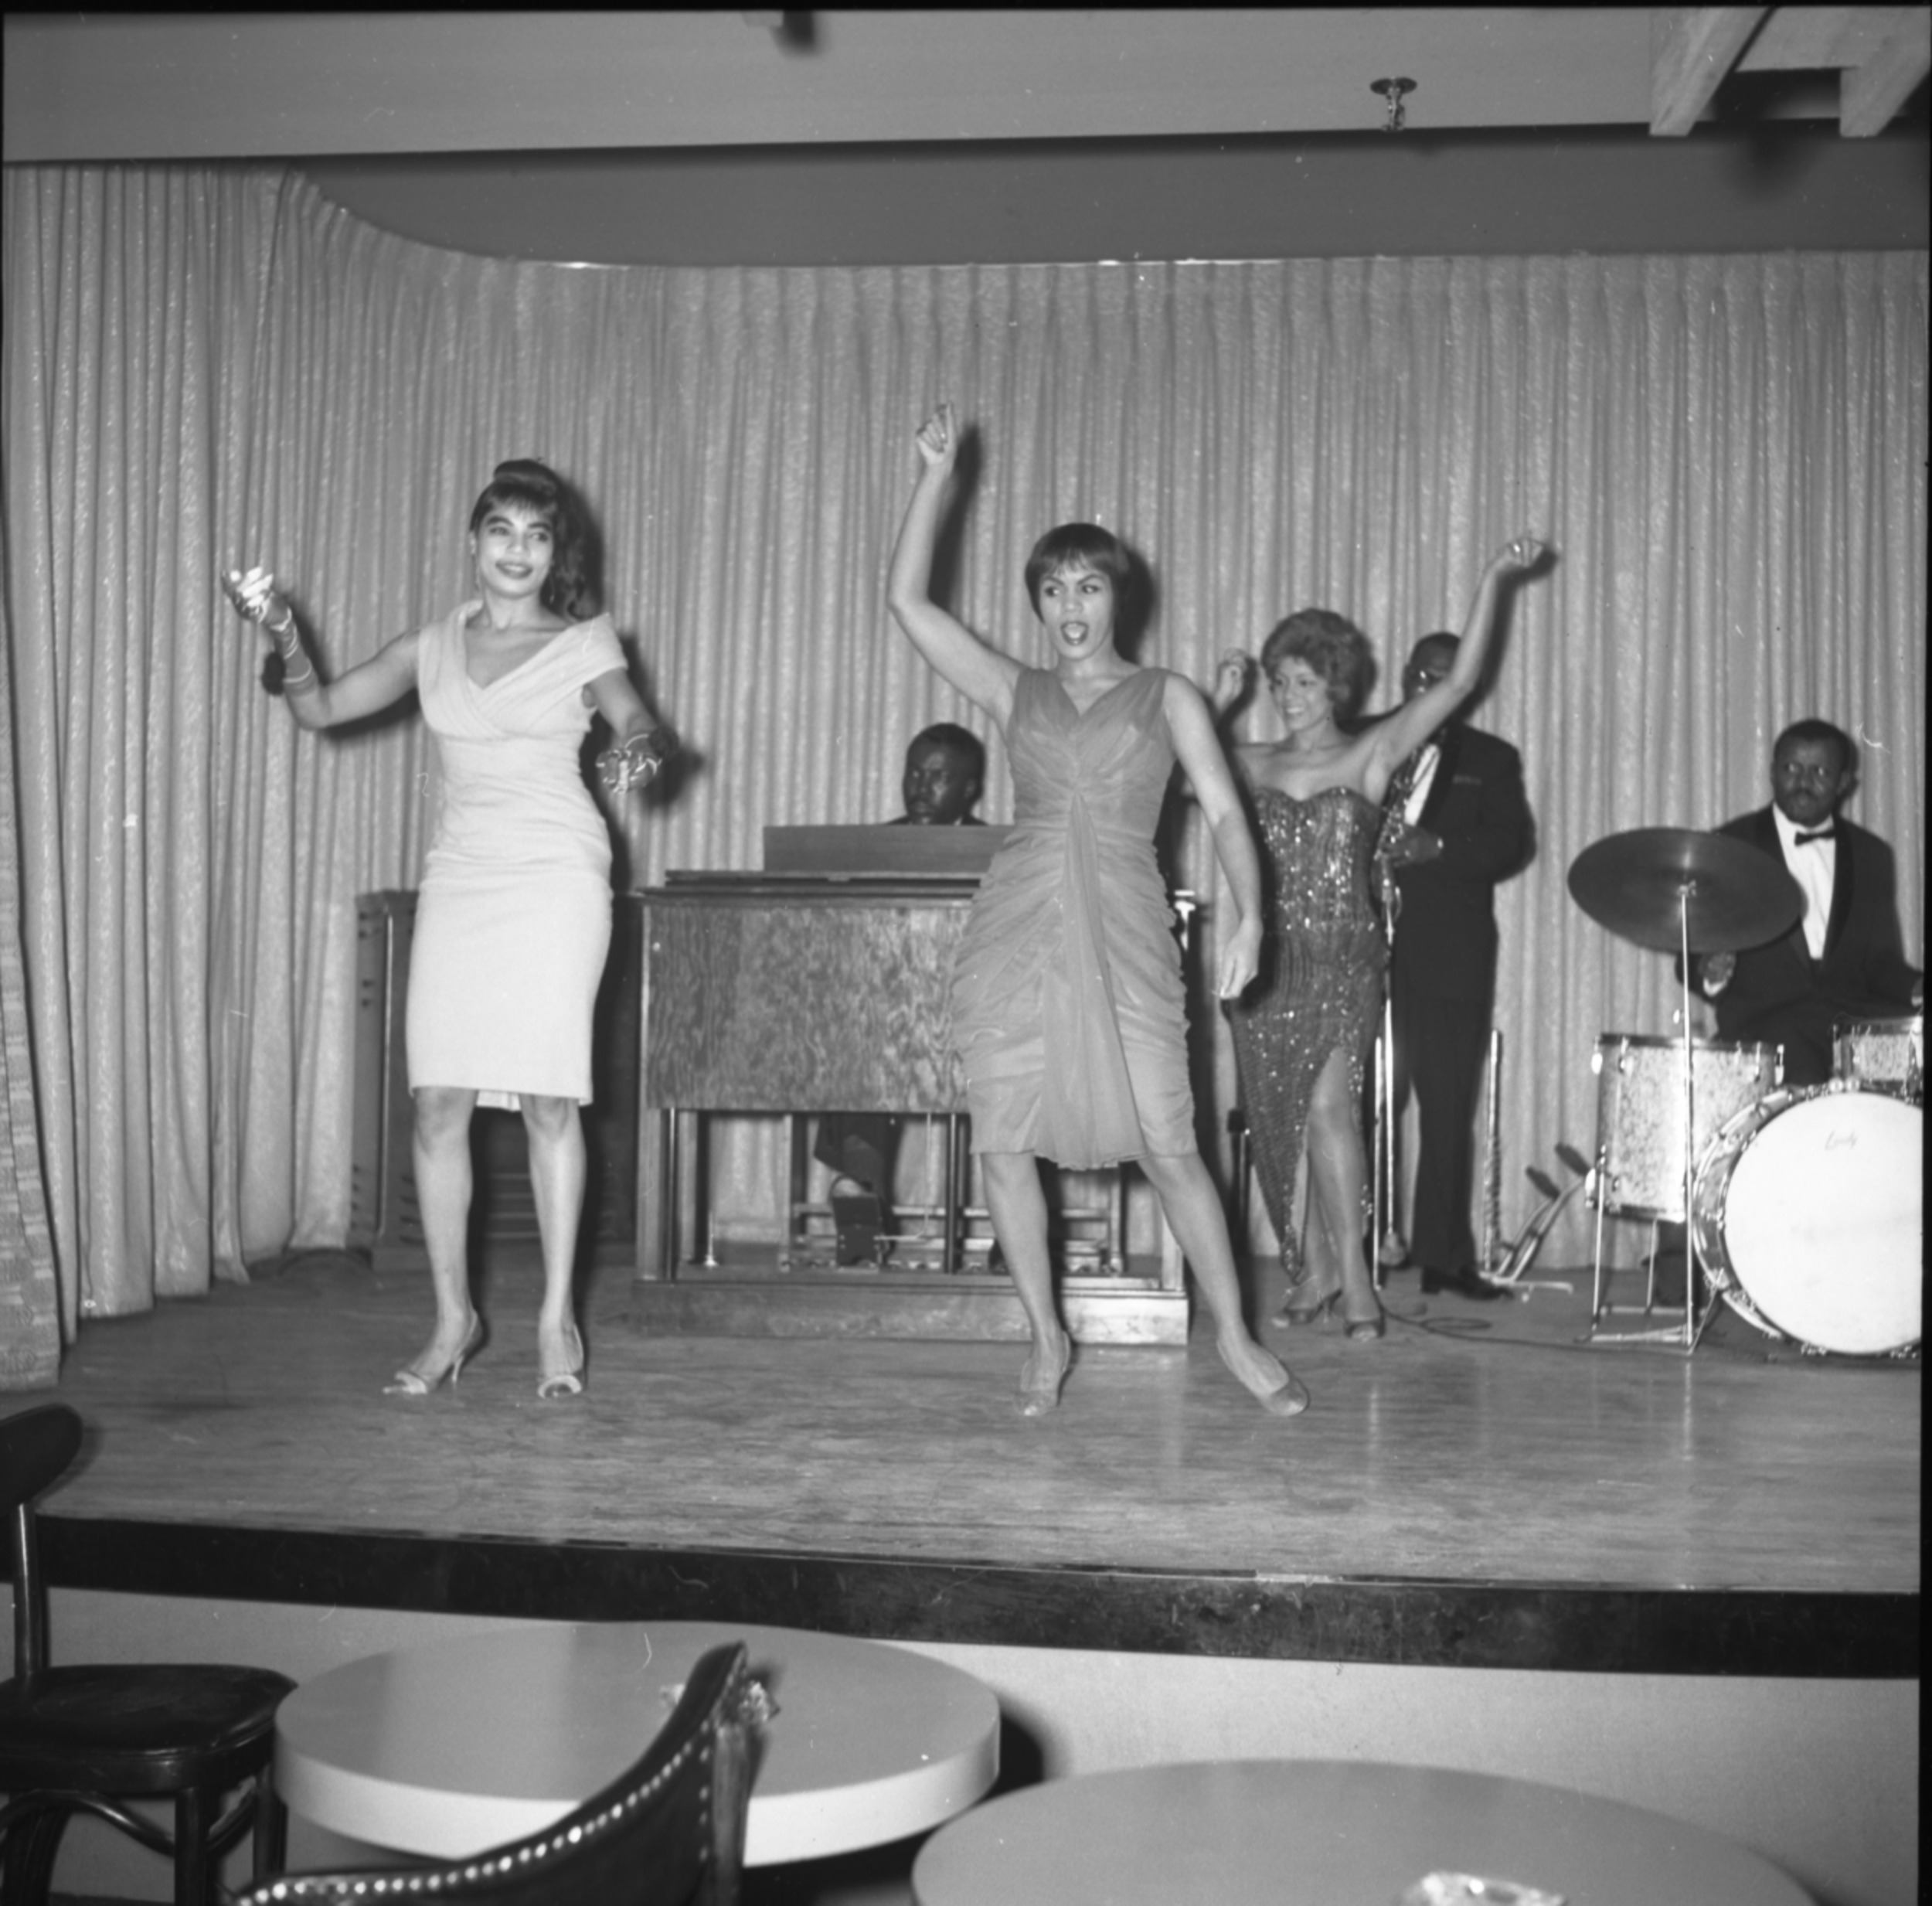 Film negative of the Carver House talent show, January 24, 1962